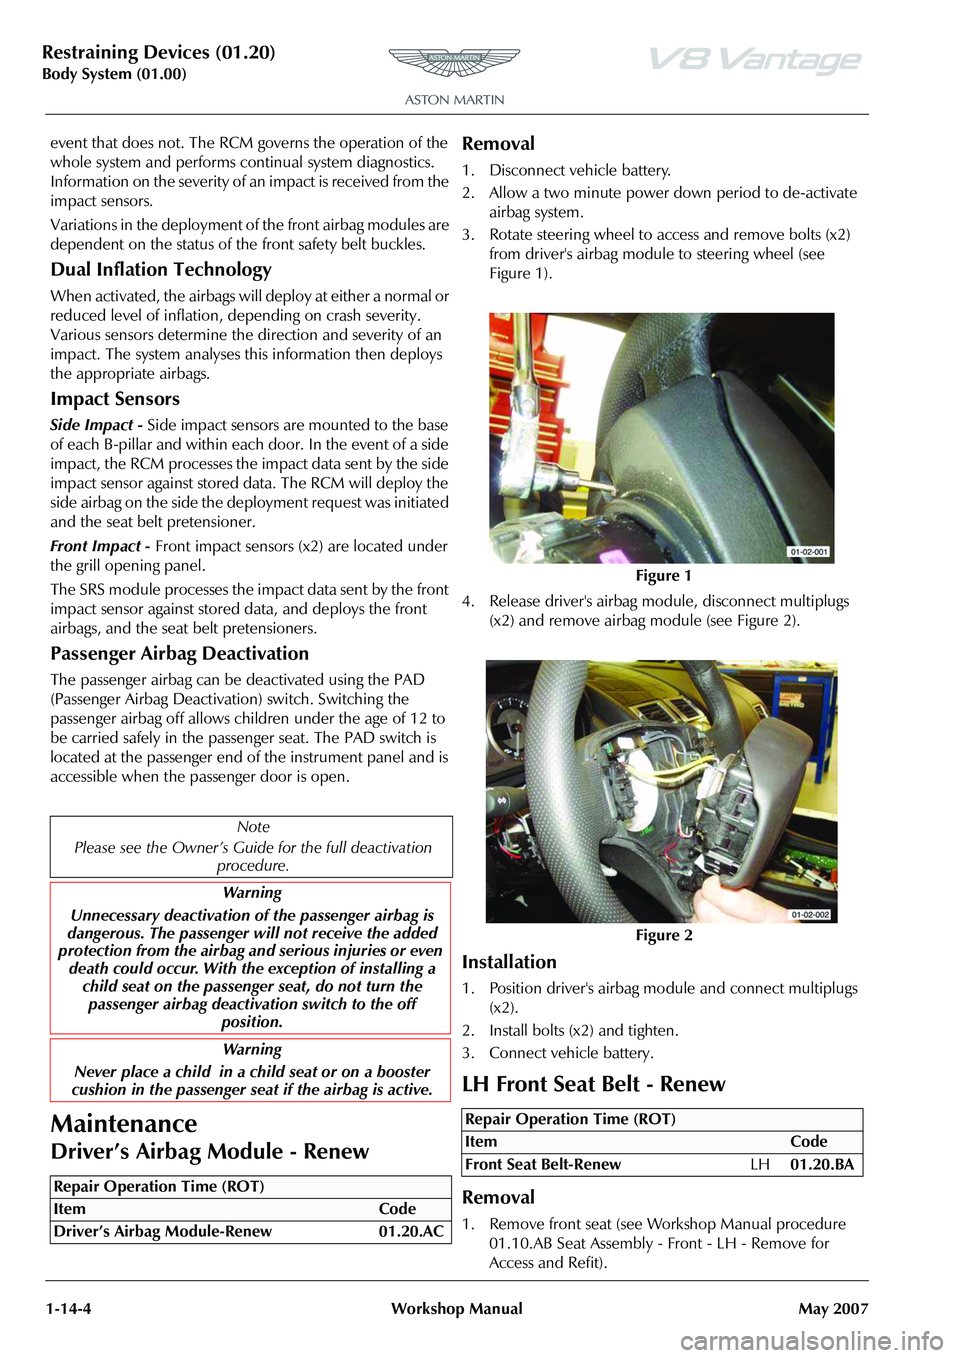 ASTON MARTIN V8 VANTAGE 2010  Workshop Manual Restraining Devices (01.20)
Body System (01.00)1-14-4 Workshop Manual May 2007
event that does not. The RCM governs the operation of the 
whole system and performs continual system diagnostics. 
Infor